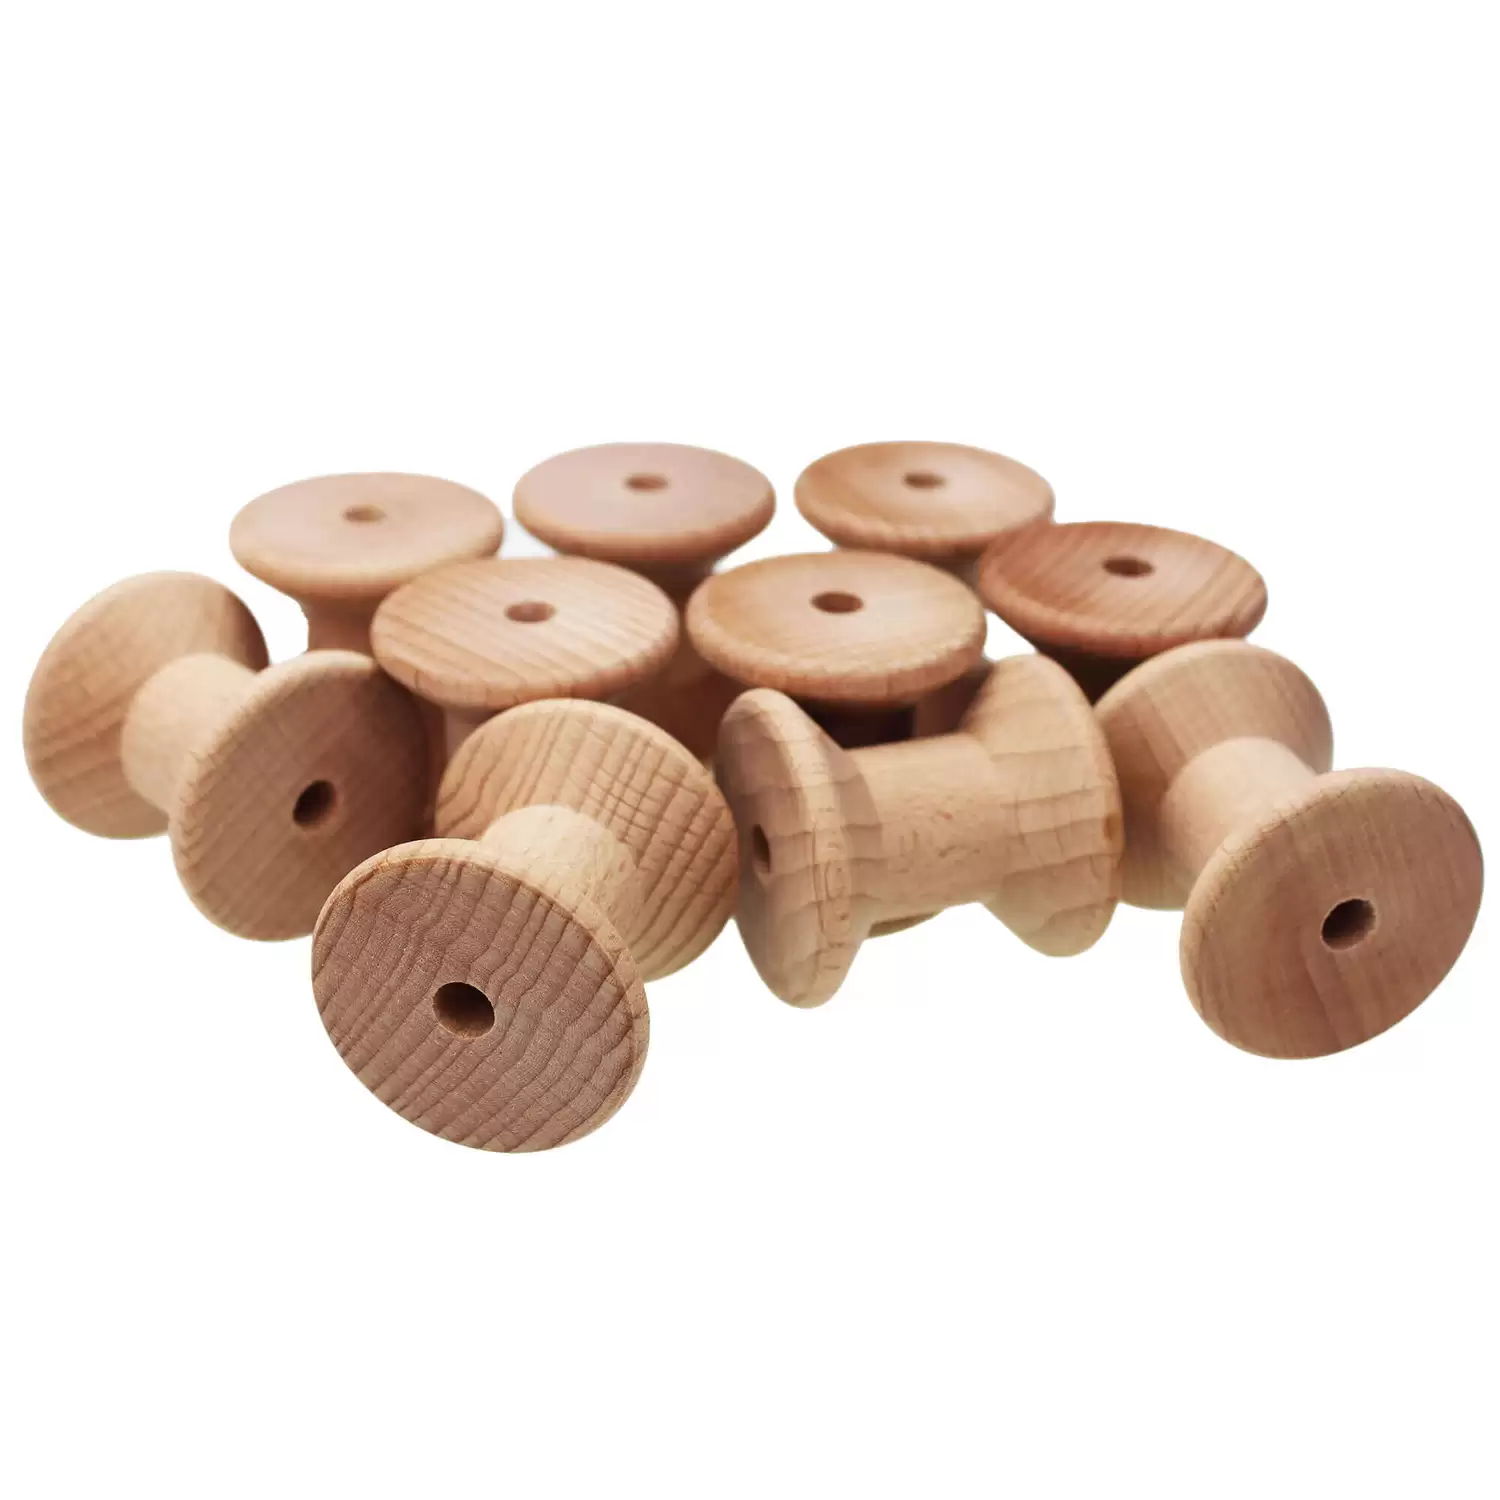 Wooden Spool Large 10 Pack - Gompels - Care & Nursery Supply Specialists